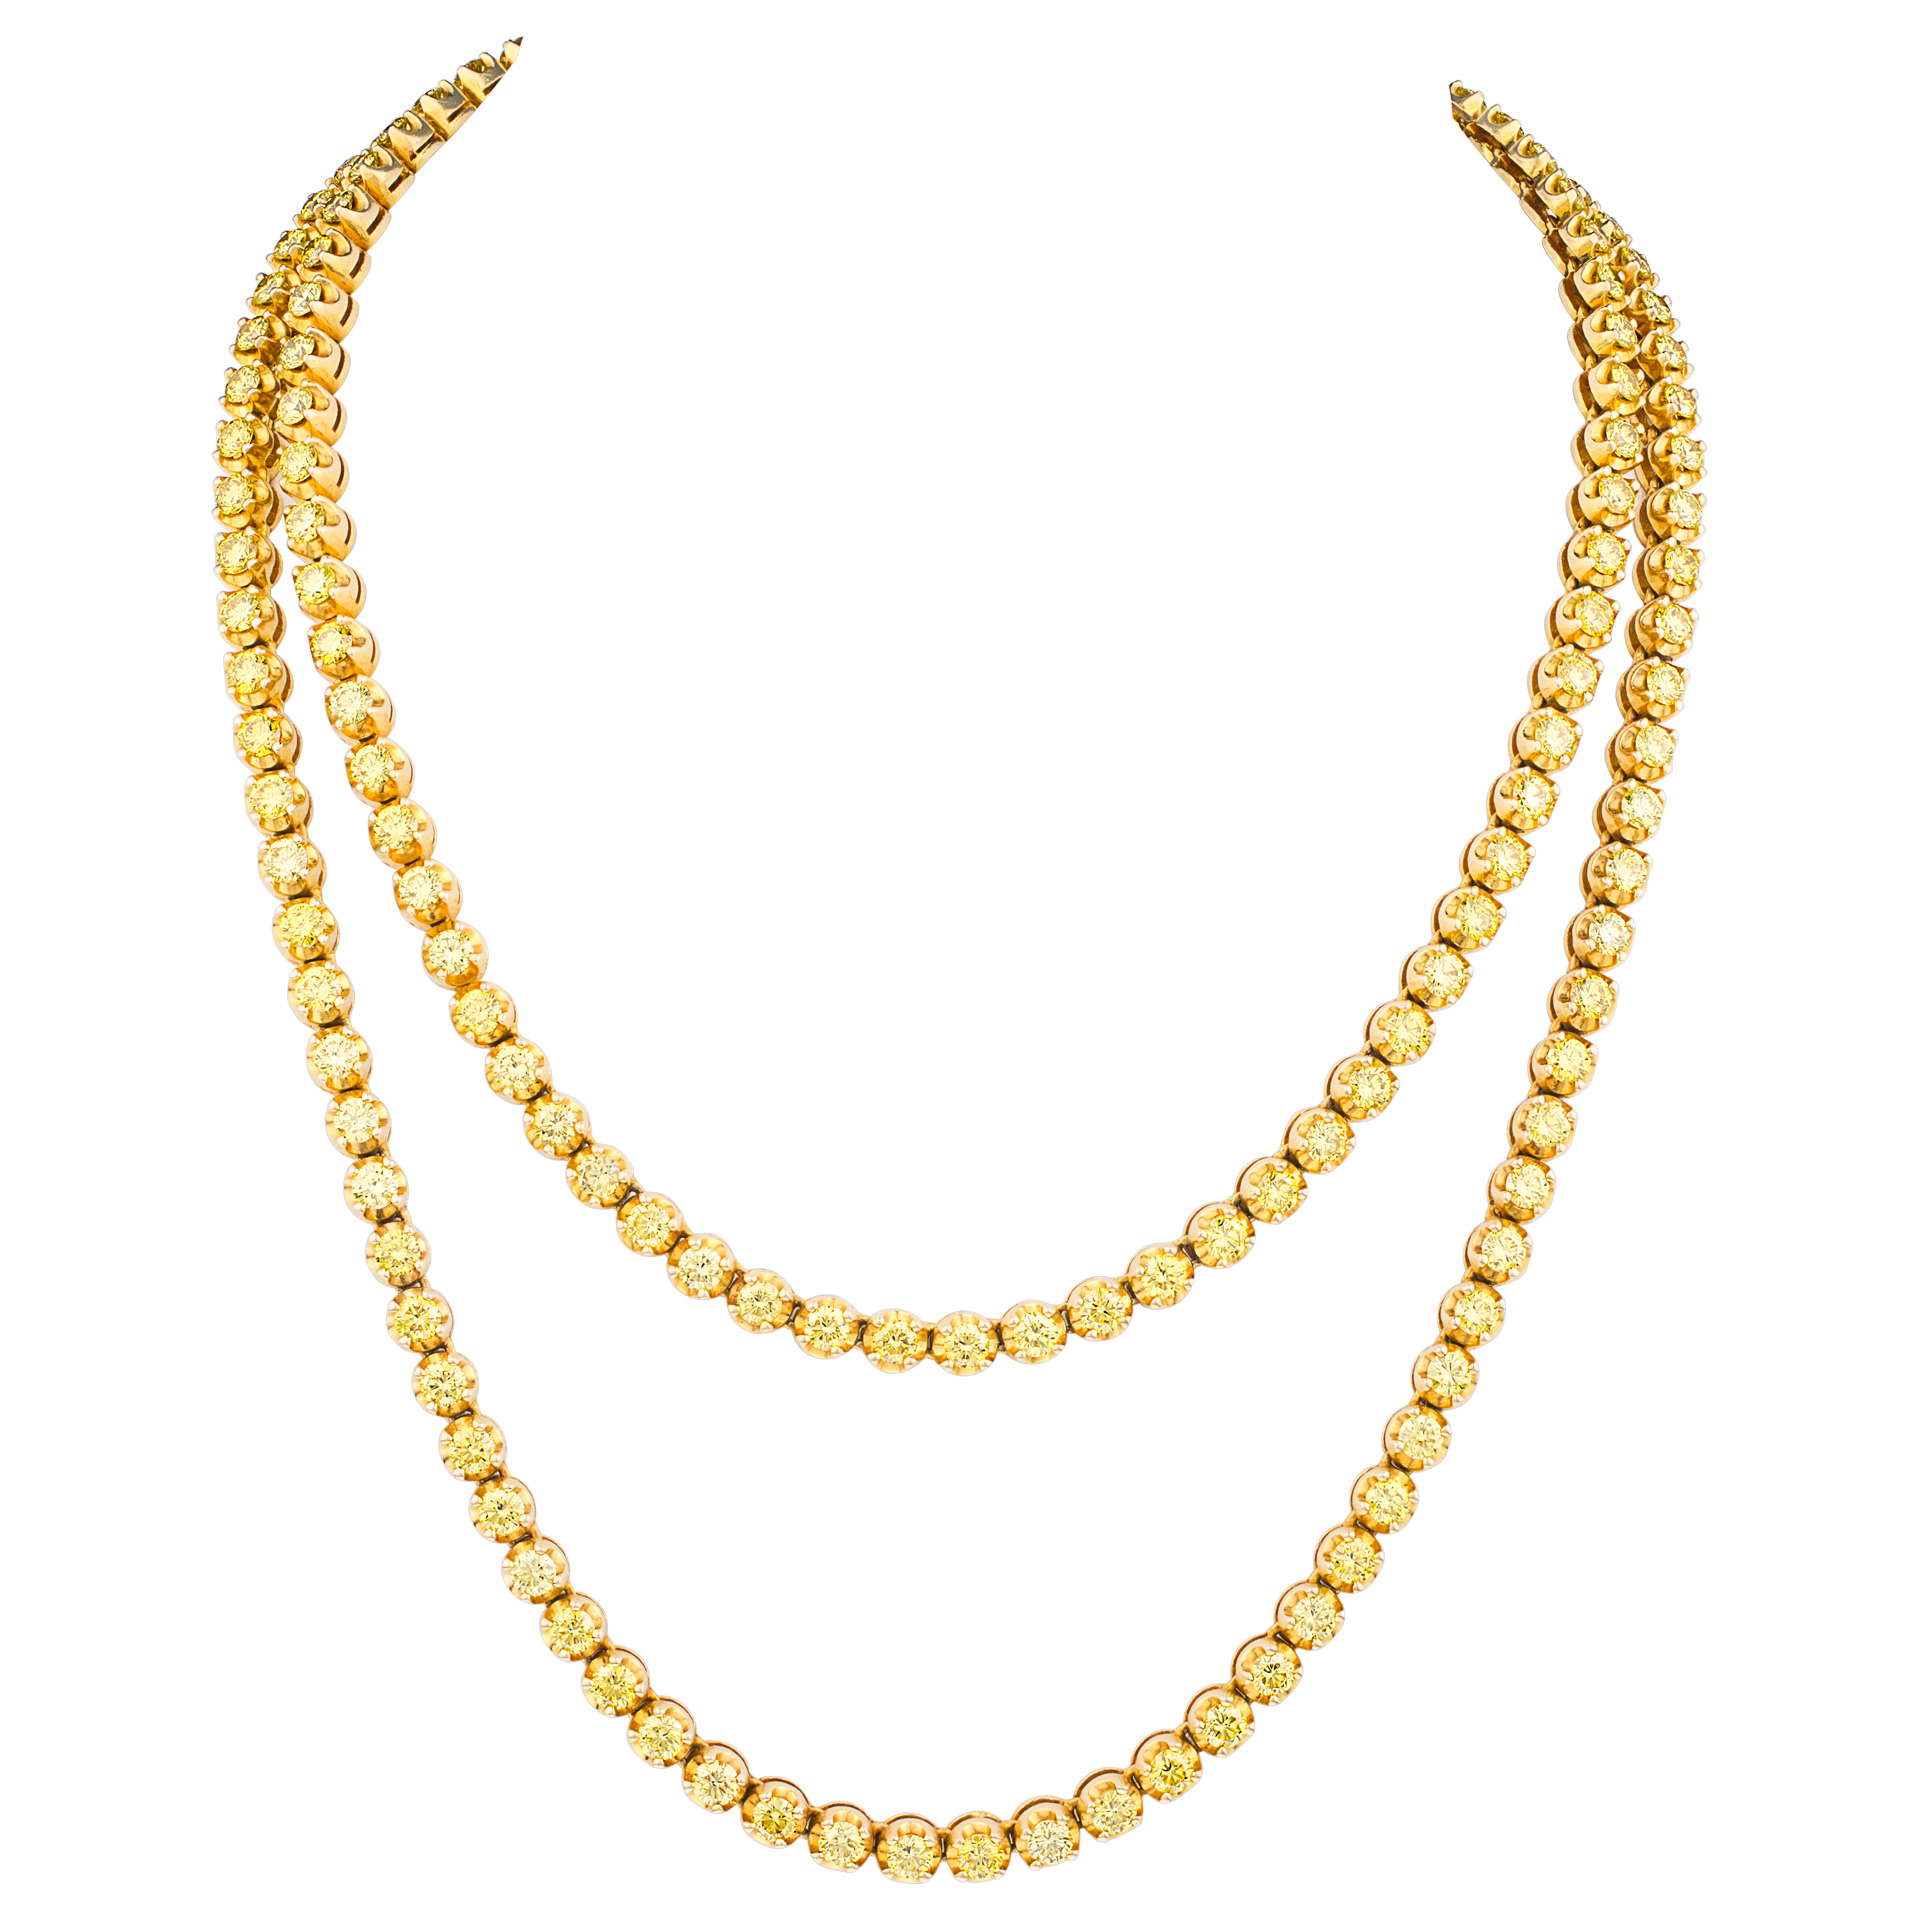 Golden yellow diamond necklace in 14k yellow gold image 1